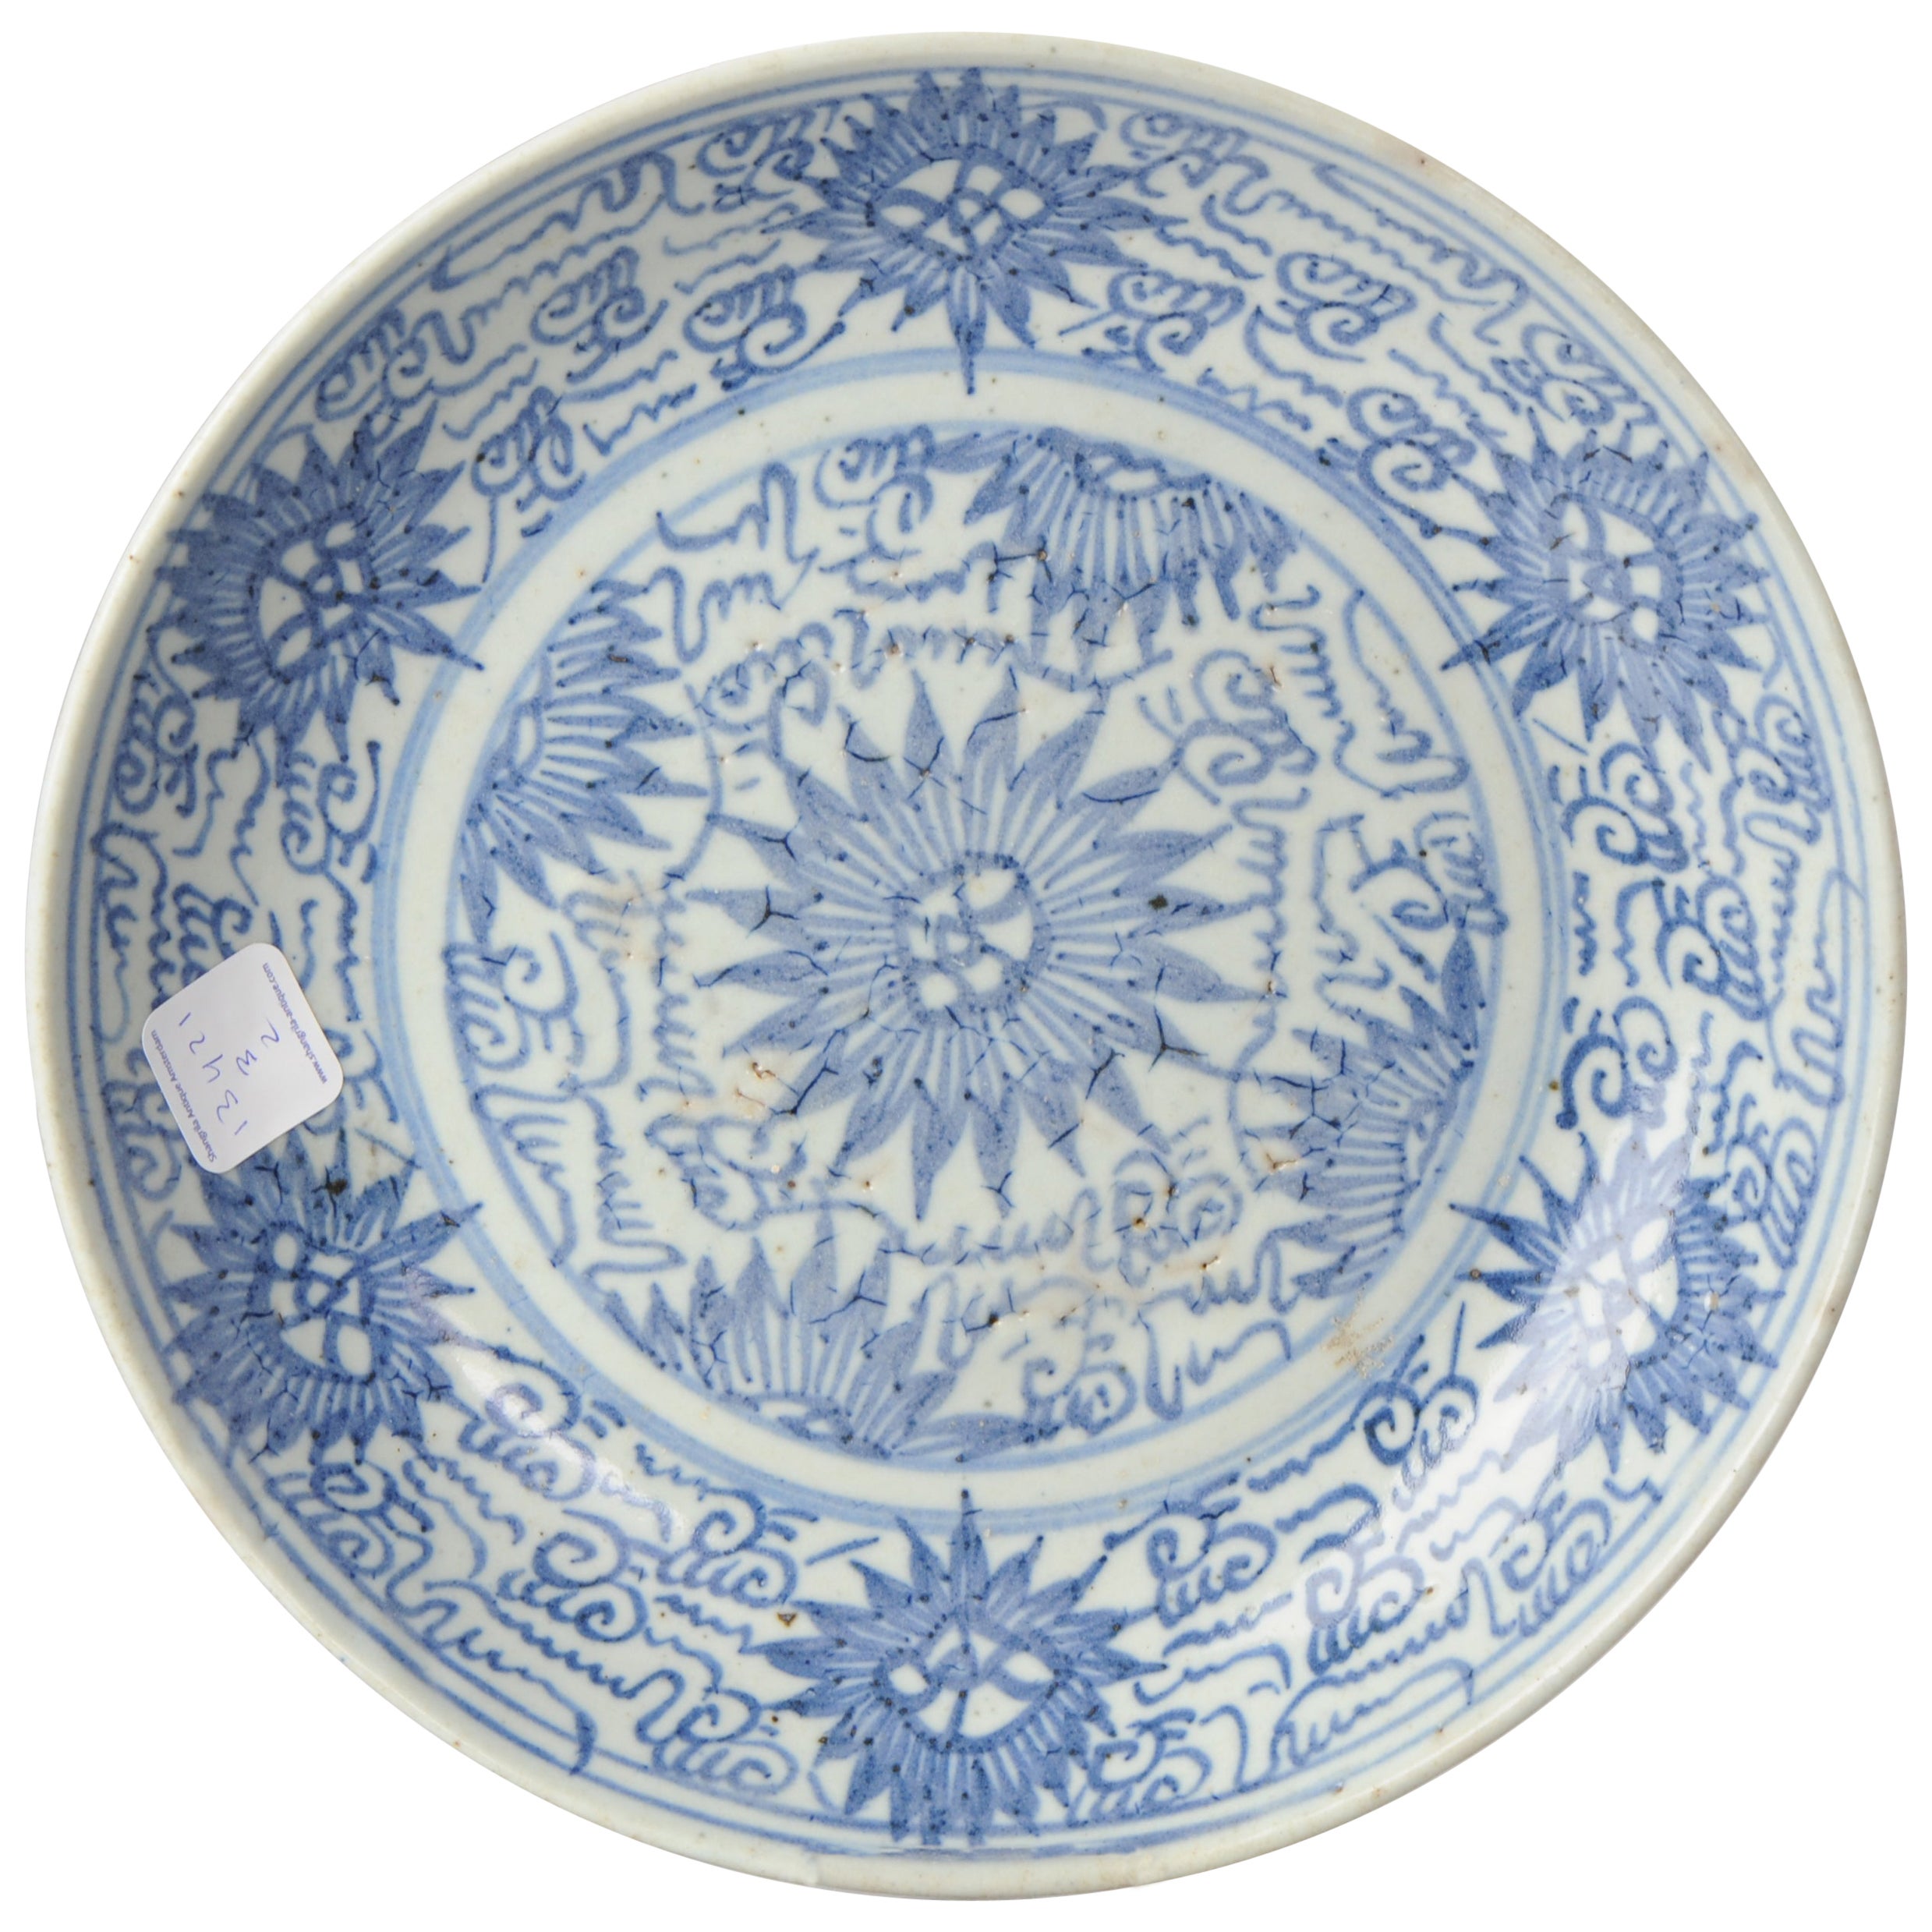 Perfect Chinese Porcelain Kitchen Qing Plate South East Asia, 19th Century